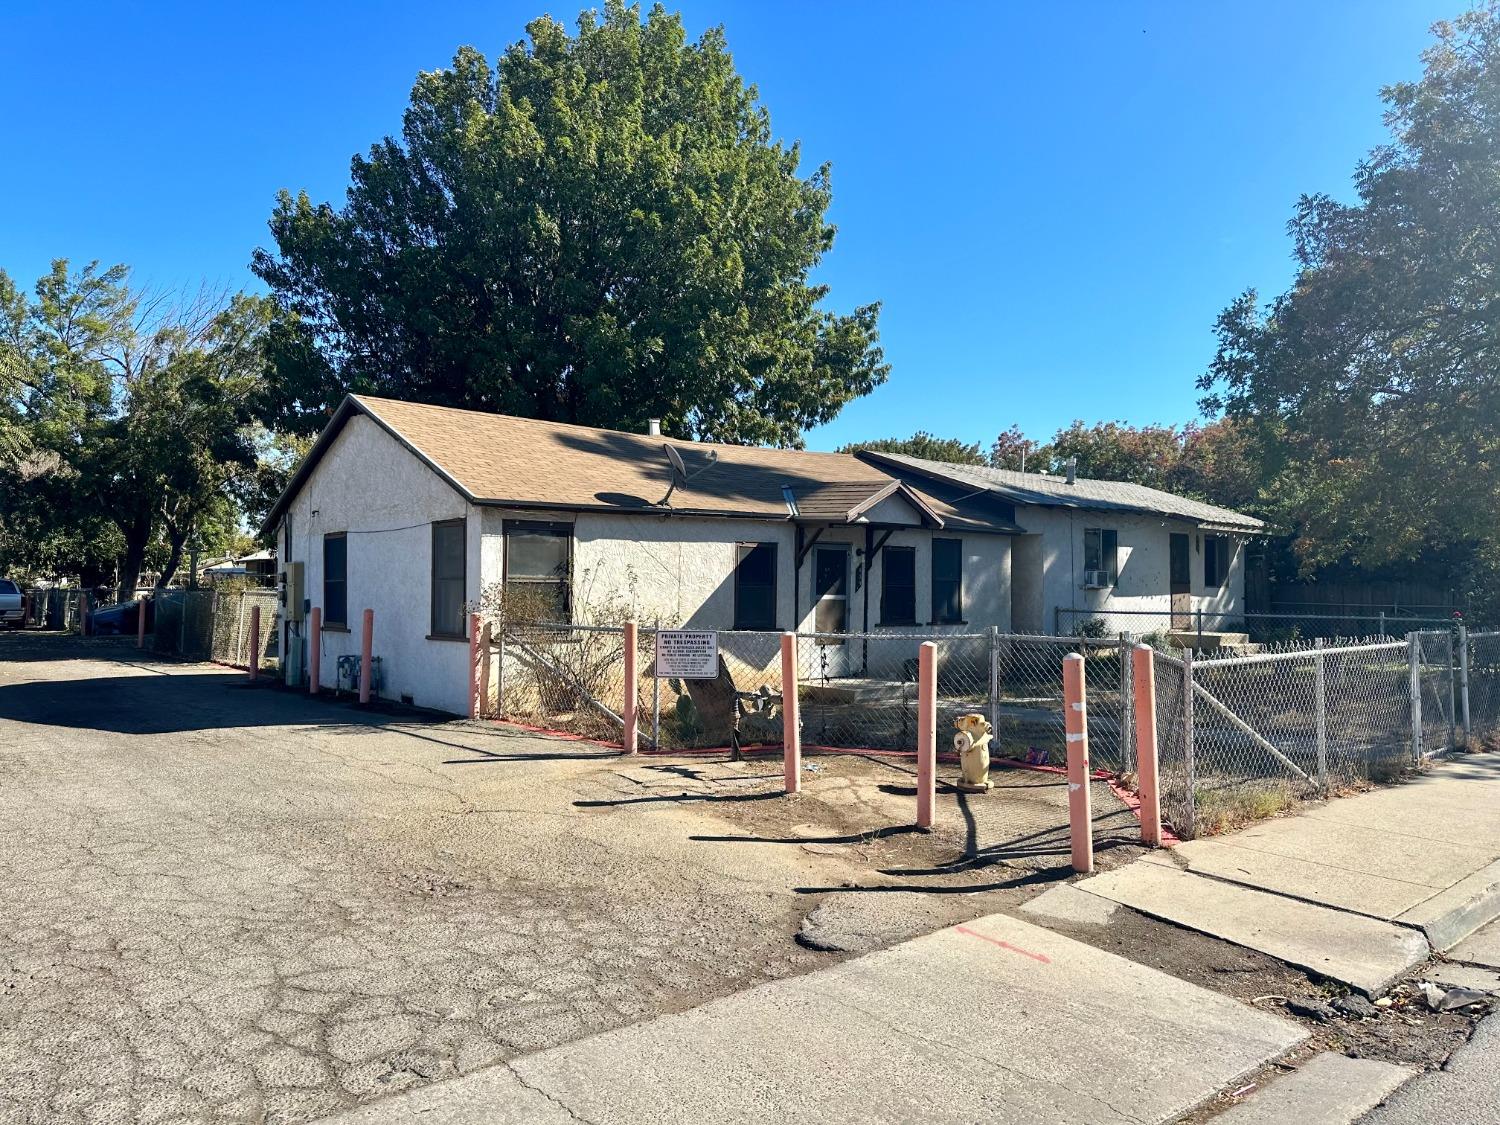 Photo of 409 N 1st St in Patterson, CA